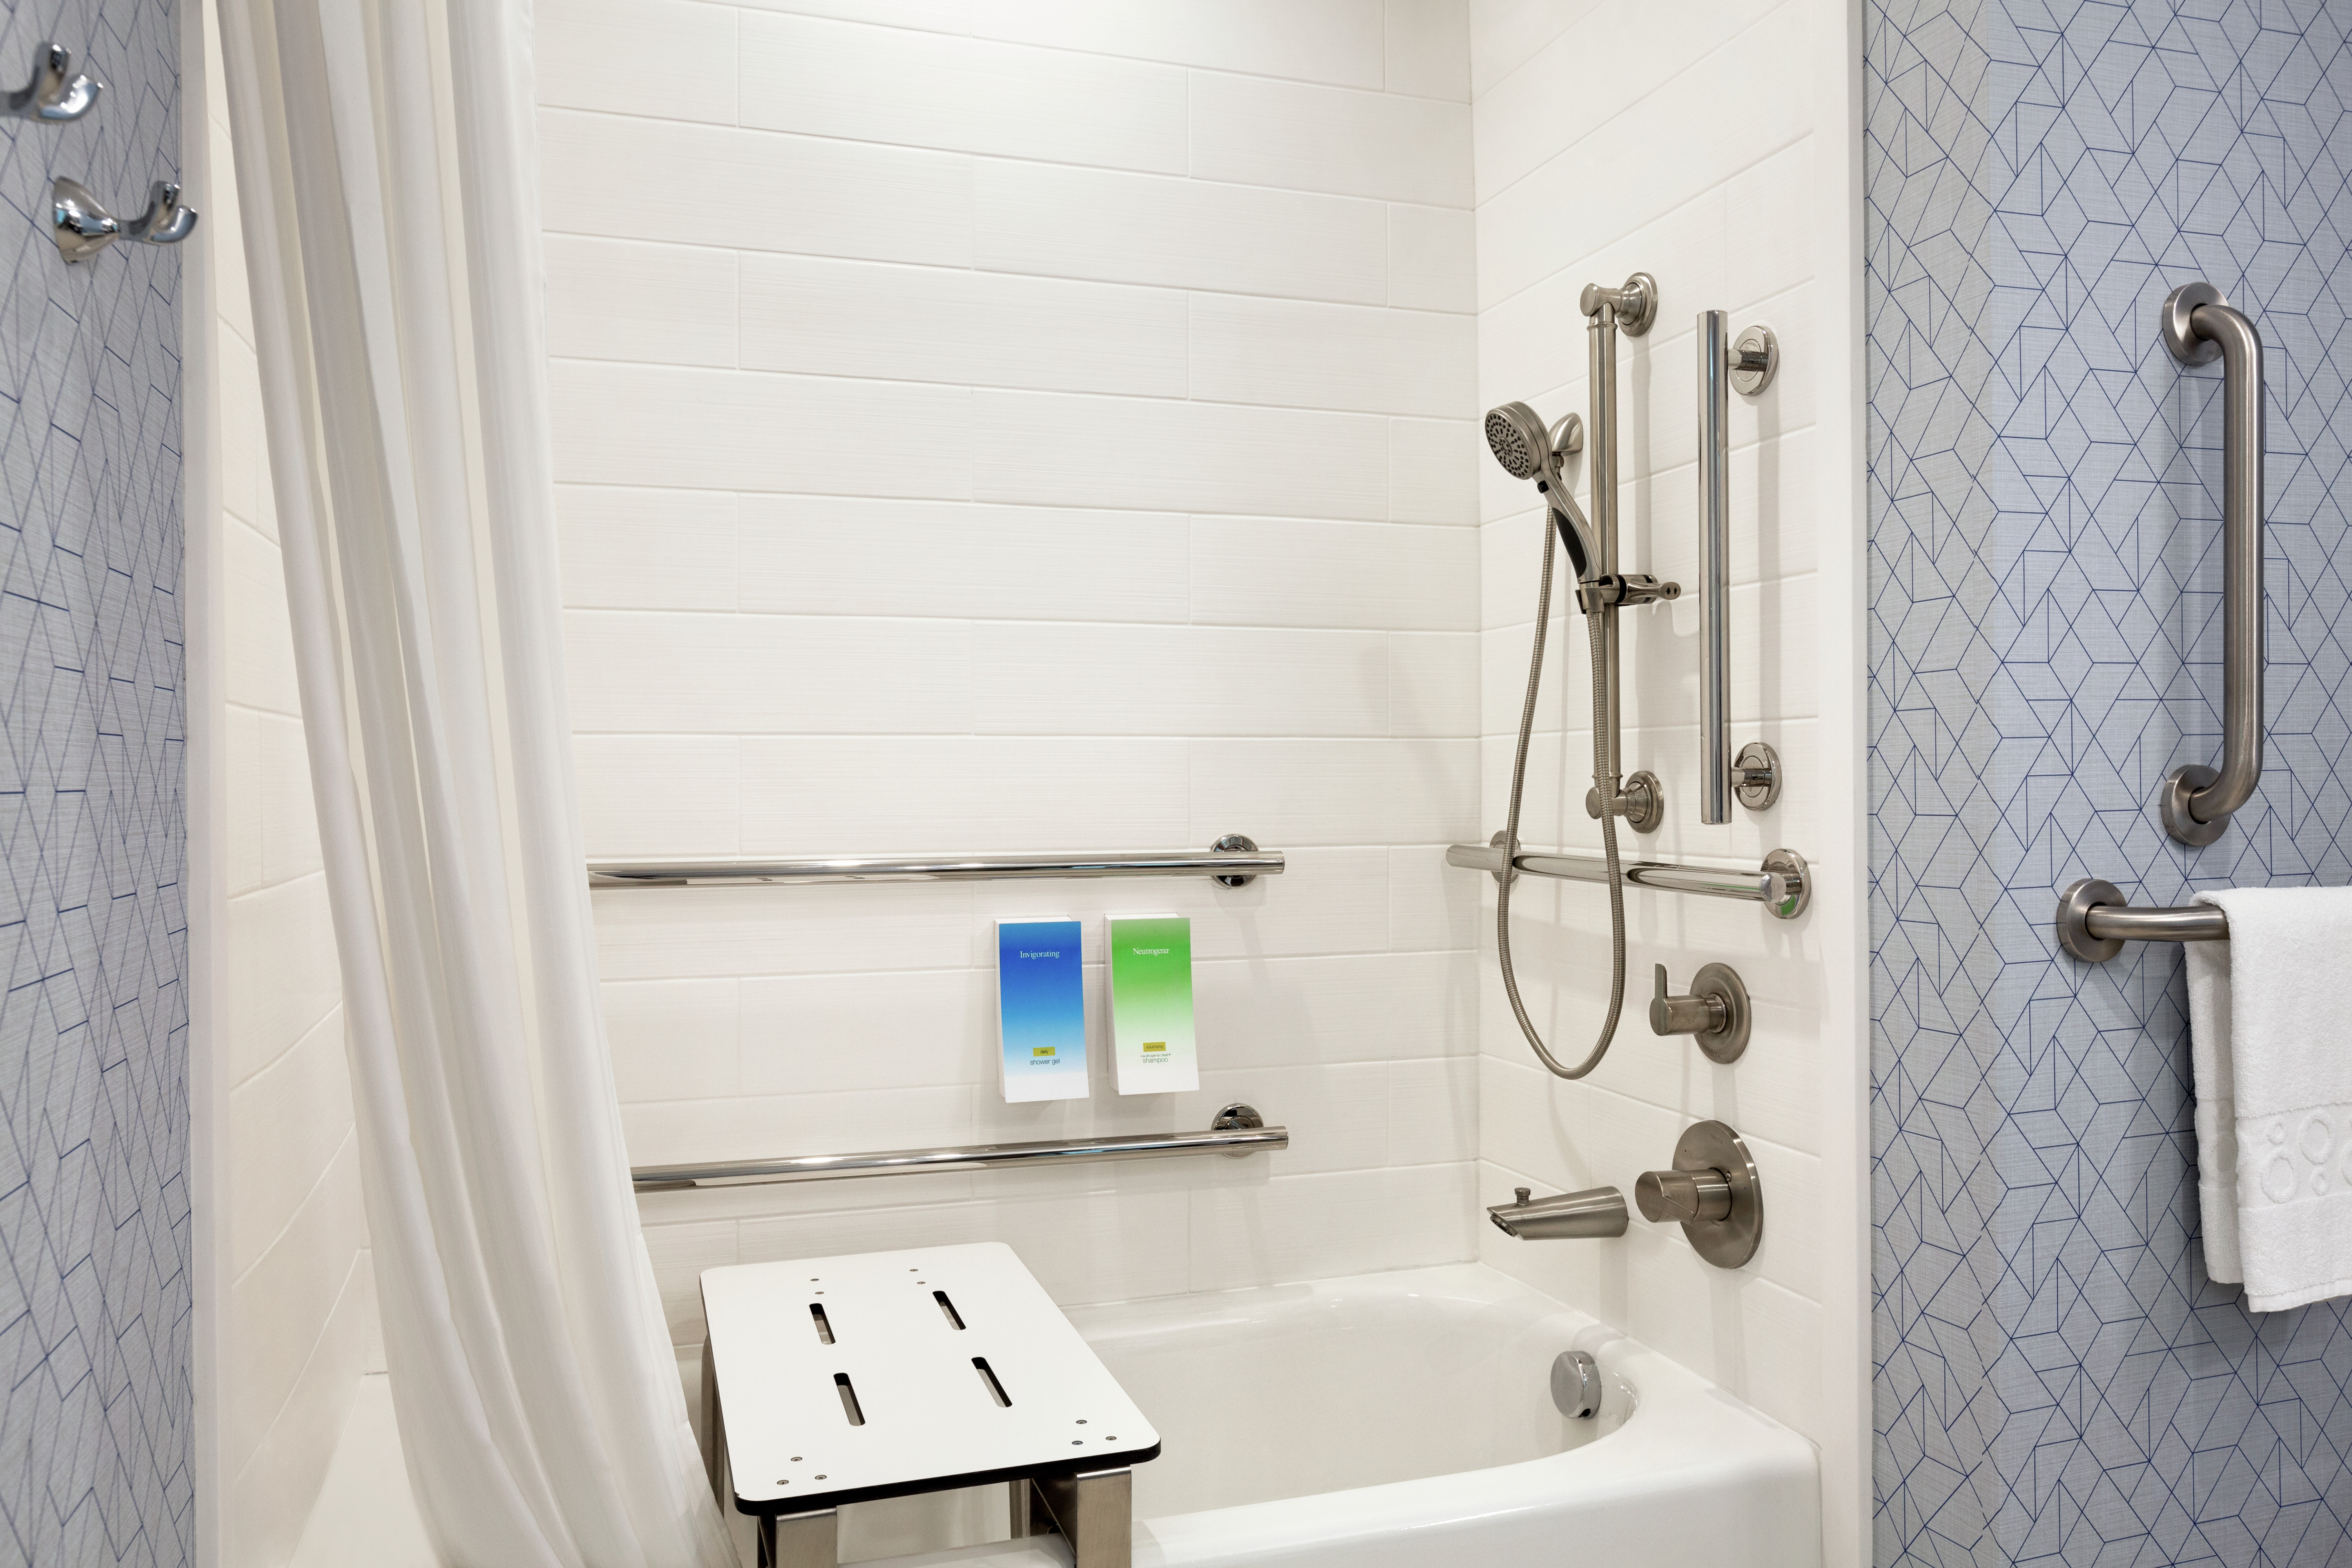 Accessible tub with seat, mobile shower head, and dispensable bathroom amenities.